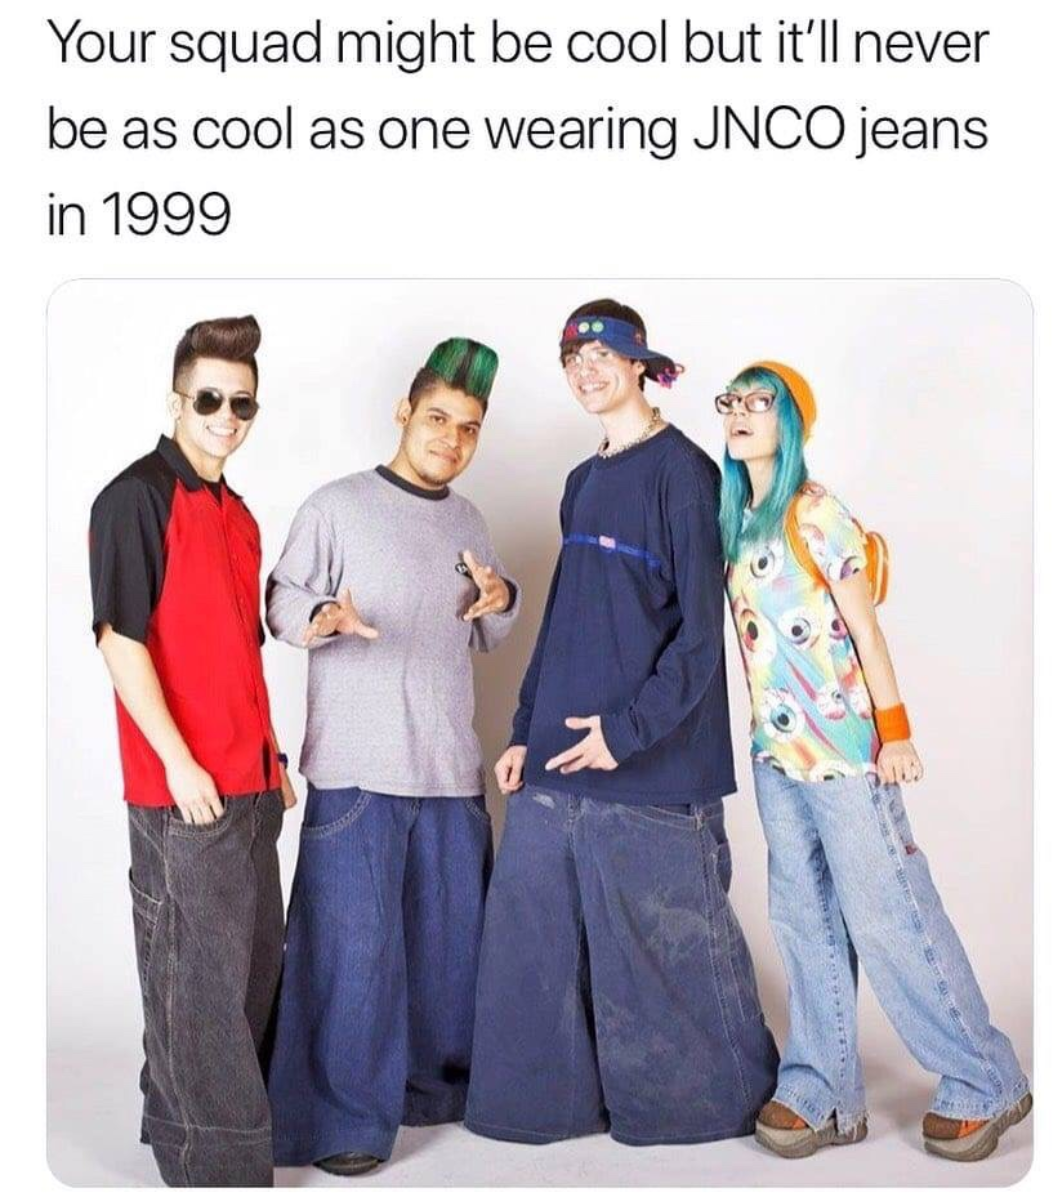 jncos meme - Your squad might be cool but it'll never be as cool as one wearing Jnco jeans in 1999